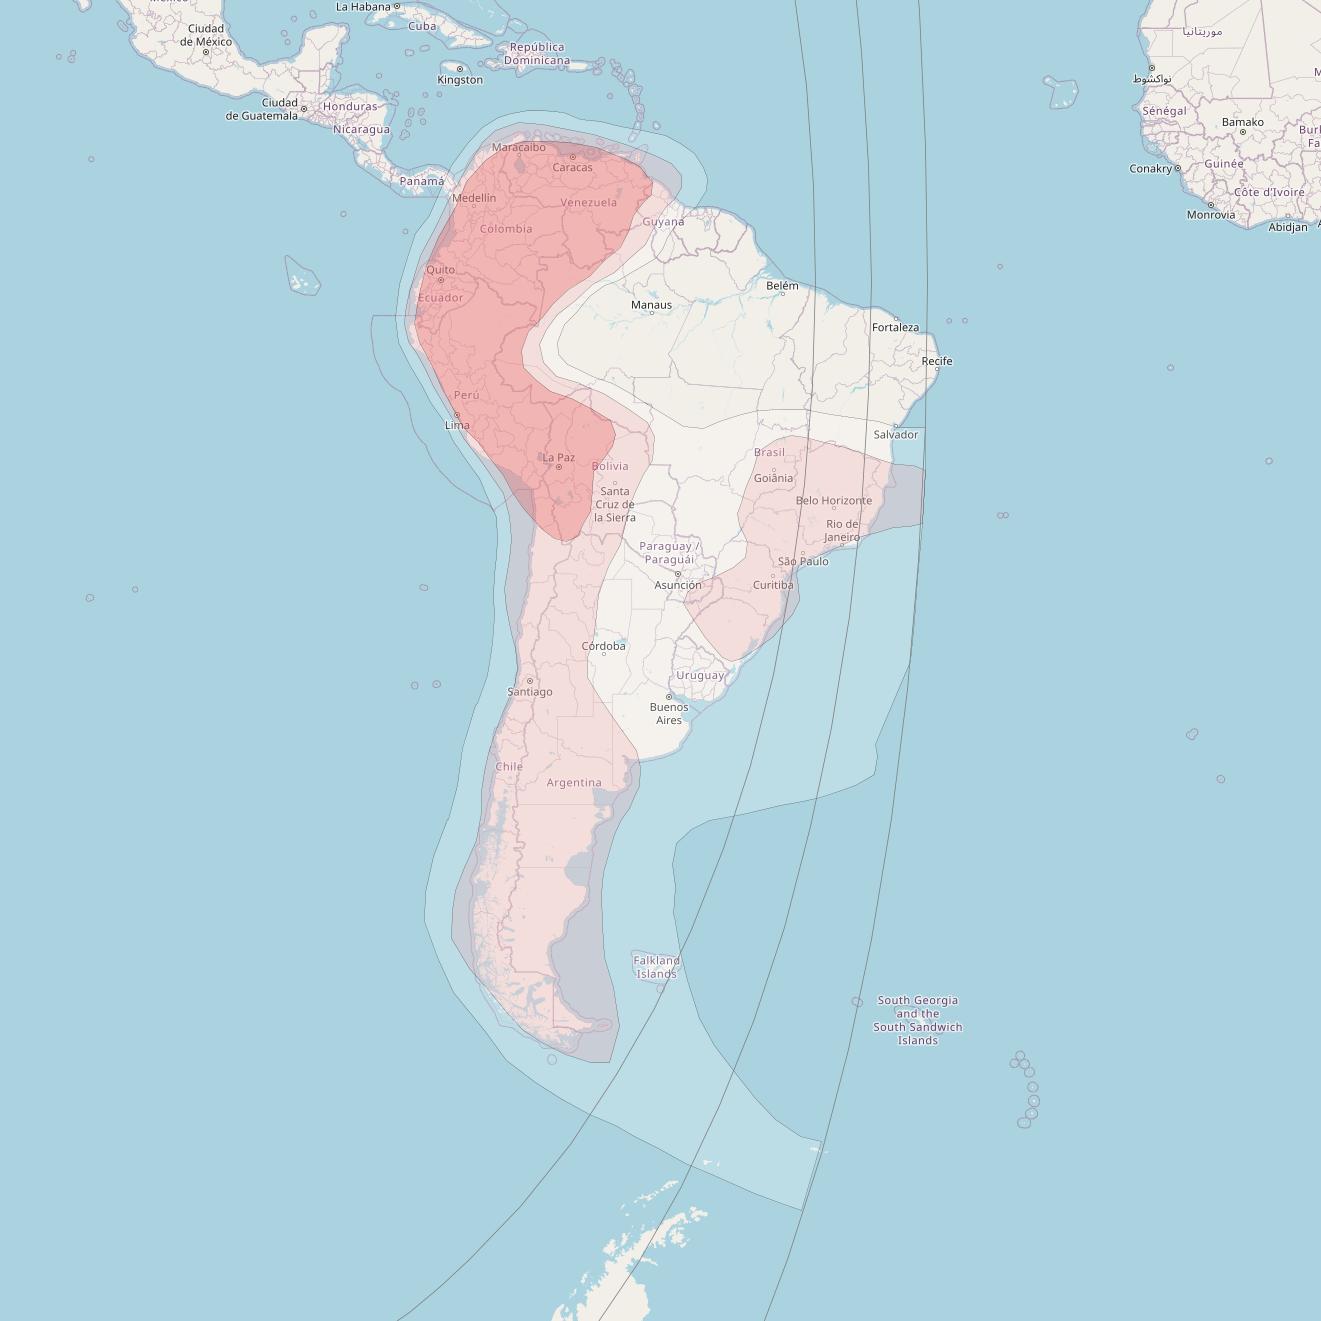 Eutelsat 117 West A at 117° W downlink Ku-band South America beam coverage map